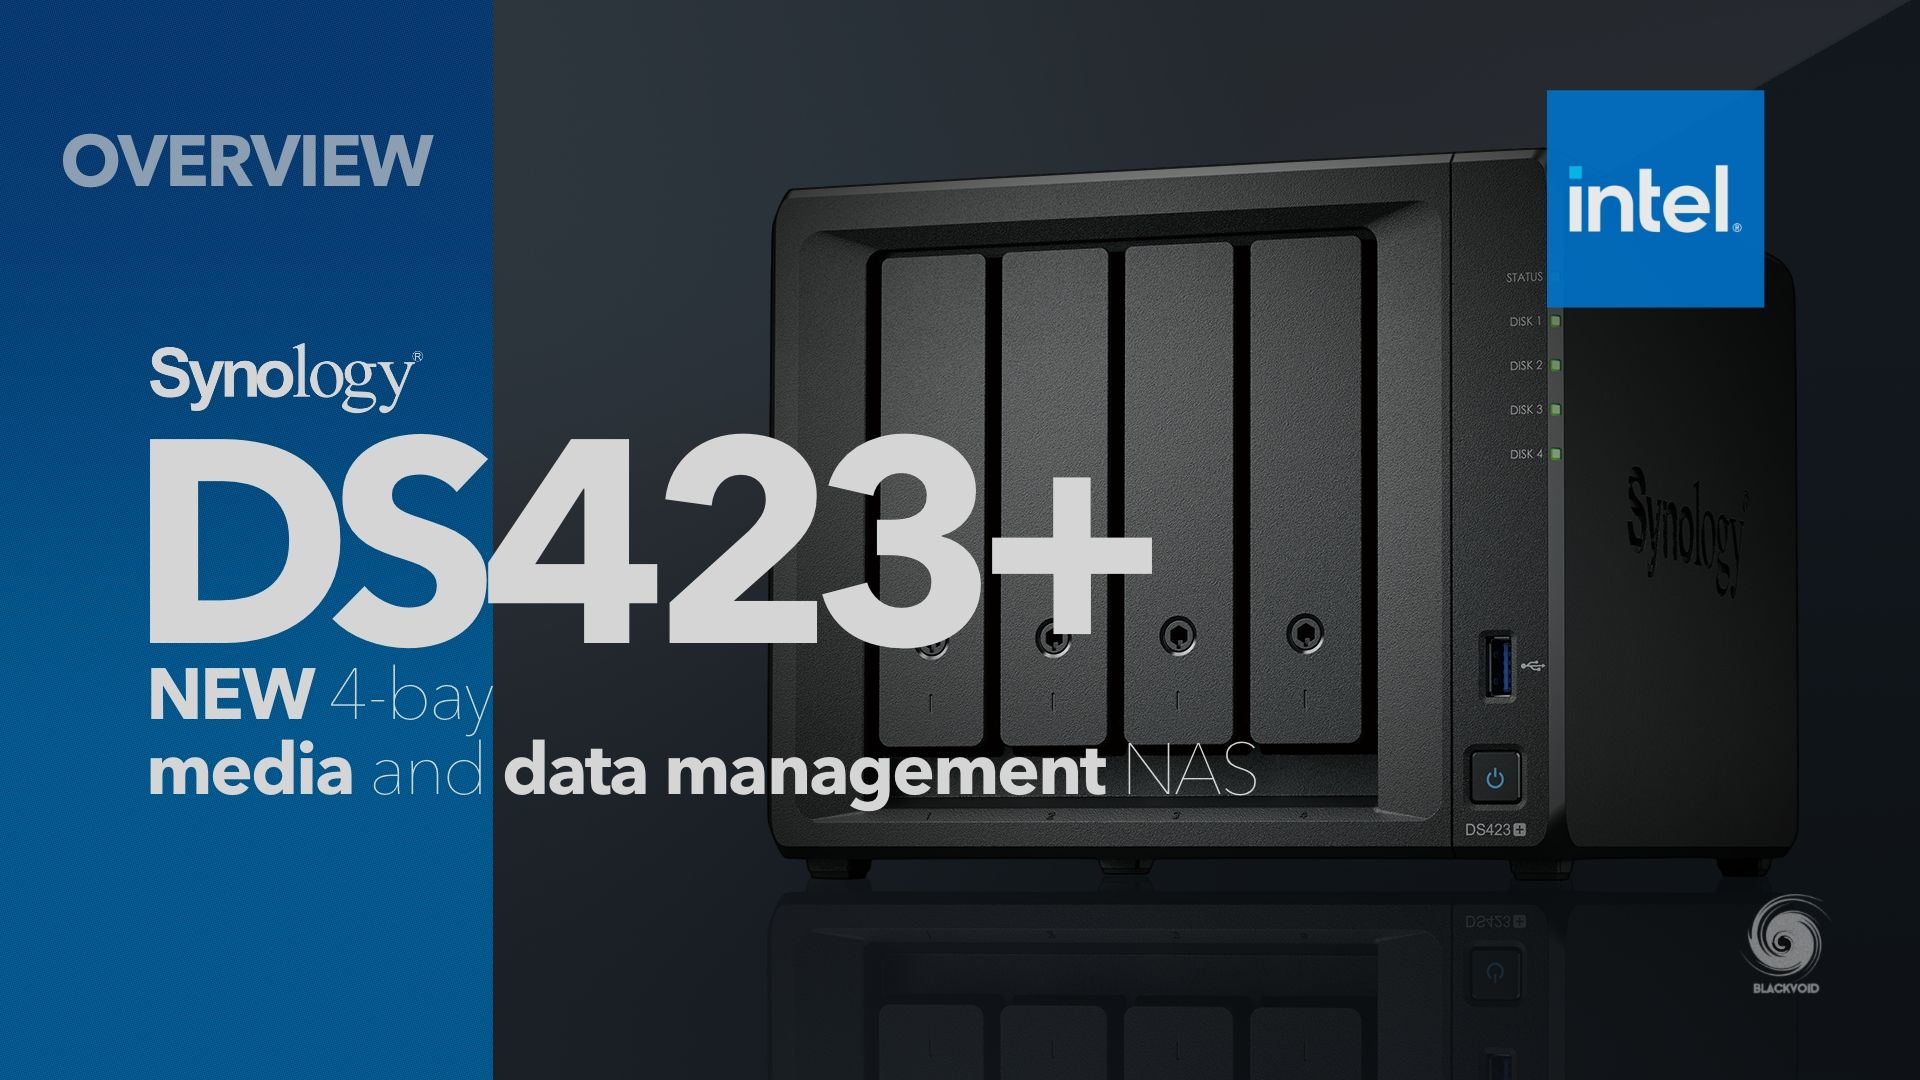 Synology introduces DiskStation DS423+, a storage solution with